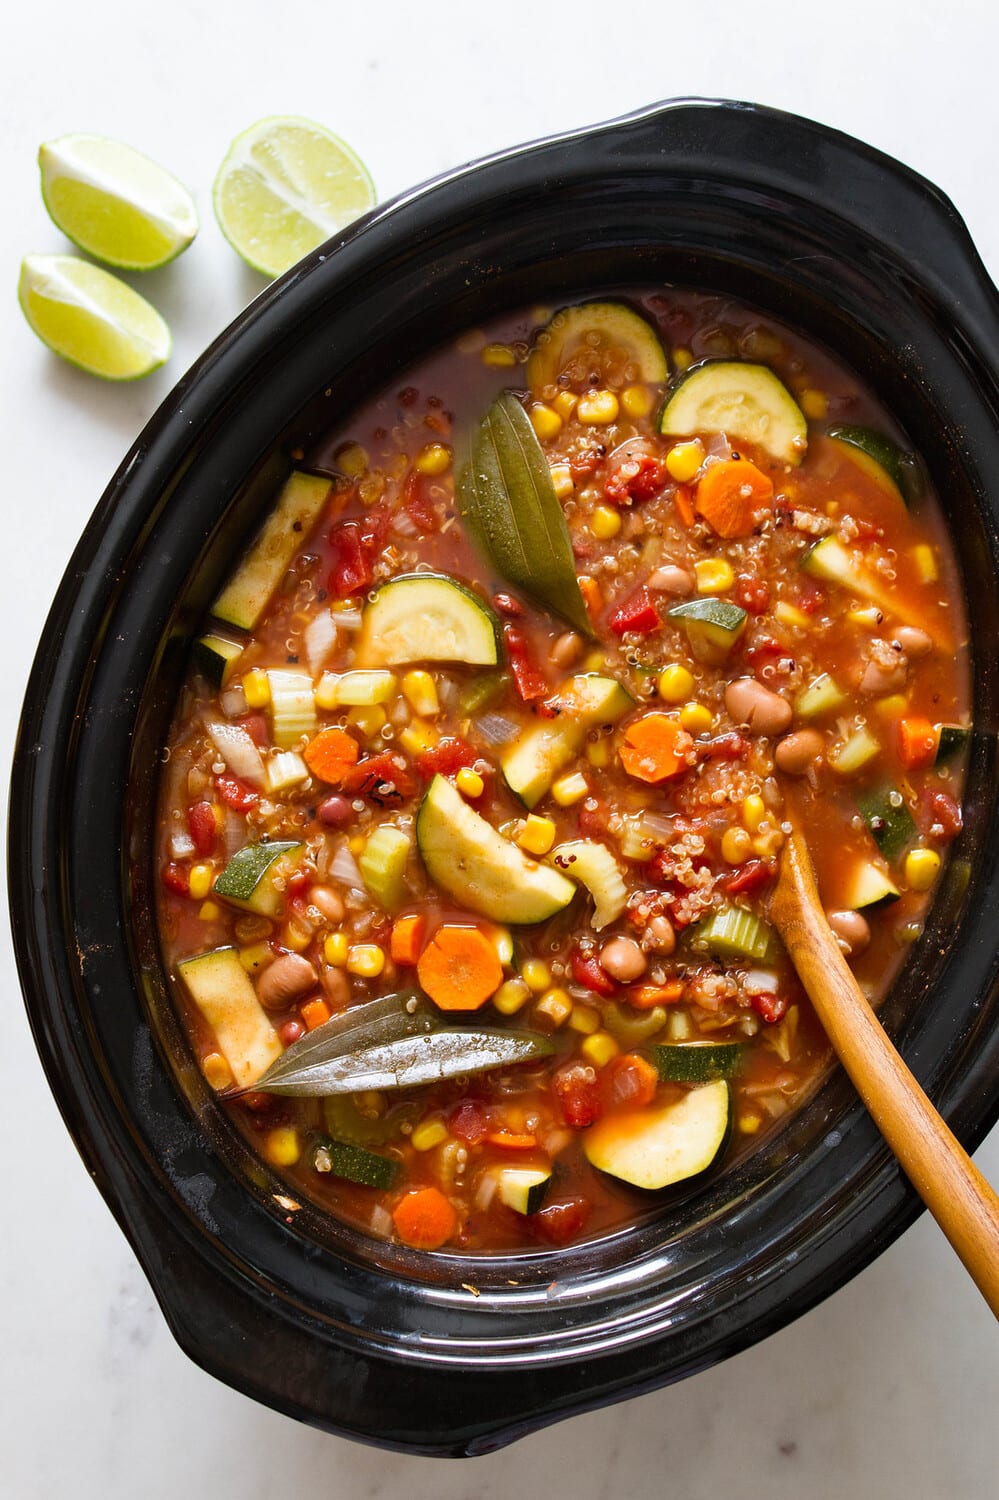 top down view of crockpot with freshly cooked tex mex quinoa vegetable soup.